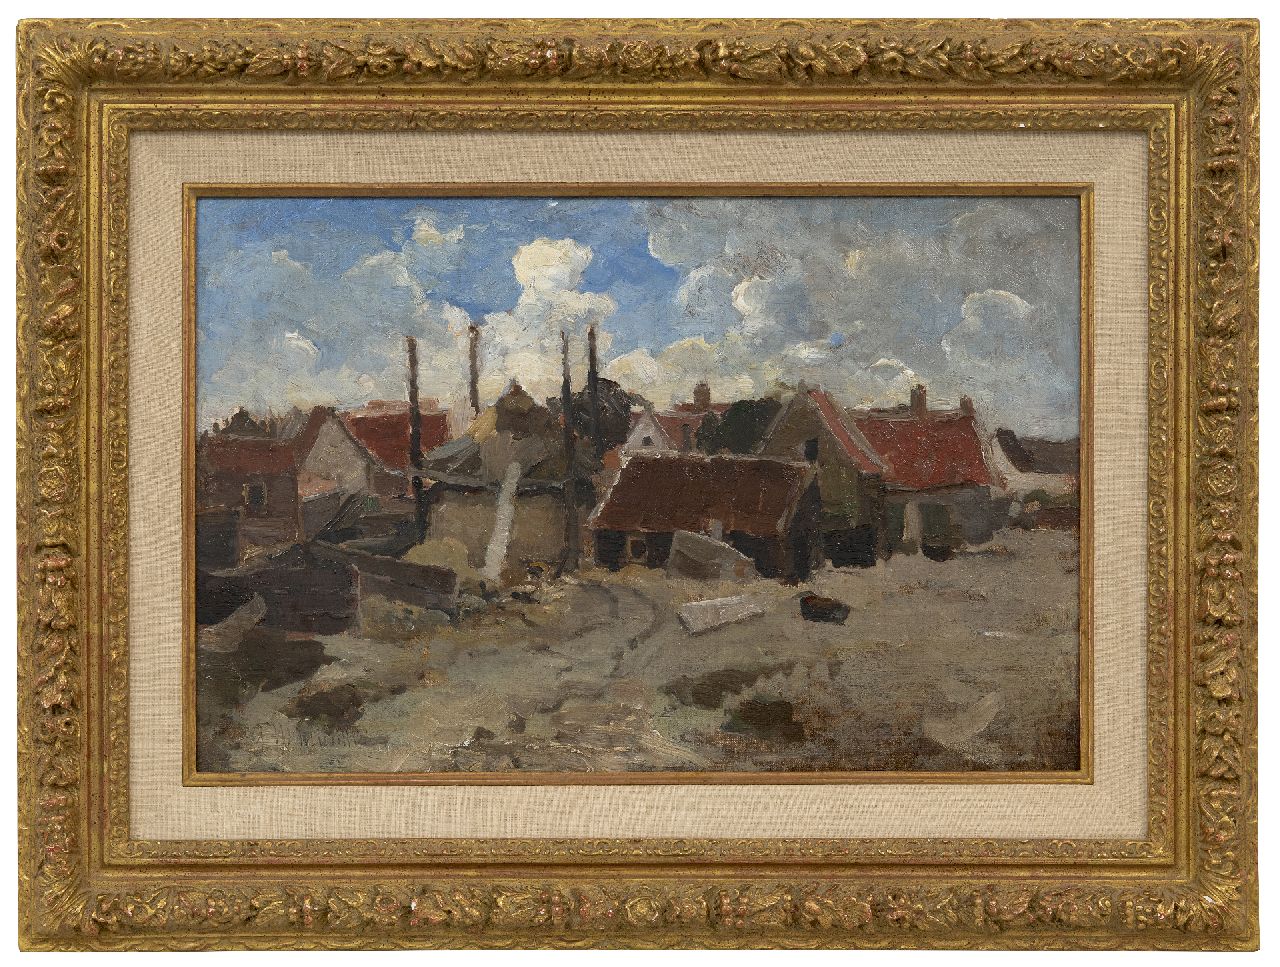 Munthe G.A.L.  | Gerhard Arij Ludwig 'Morgenstjerne' Munthe | Paintings offered for sale | Noordwijk seen from the dunes, oil on canvas laid down on panel 33.4 x 50.5 cm, signed l.l.